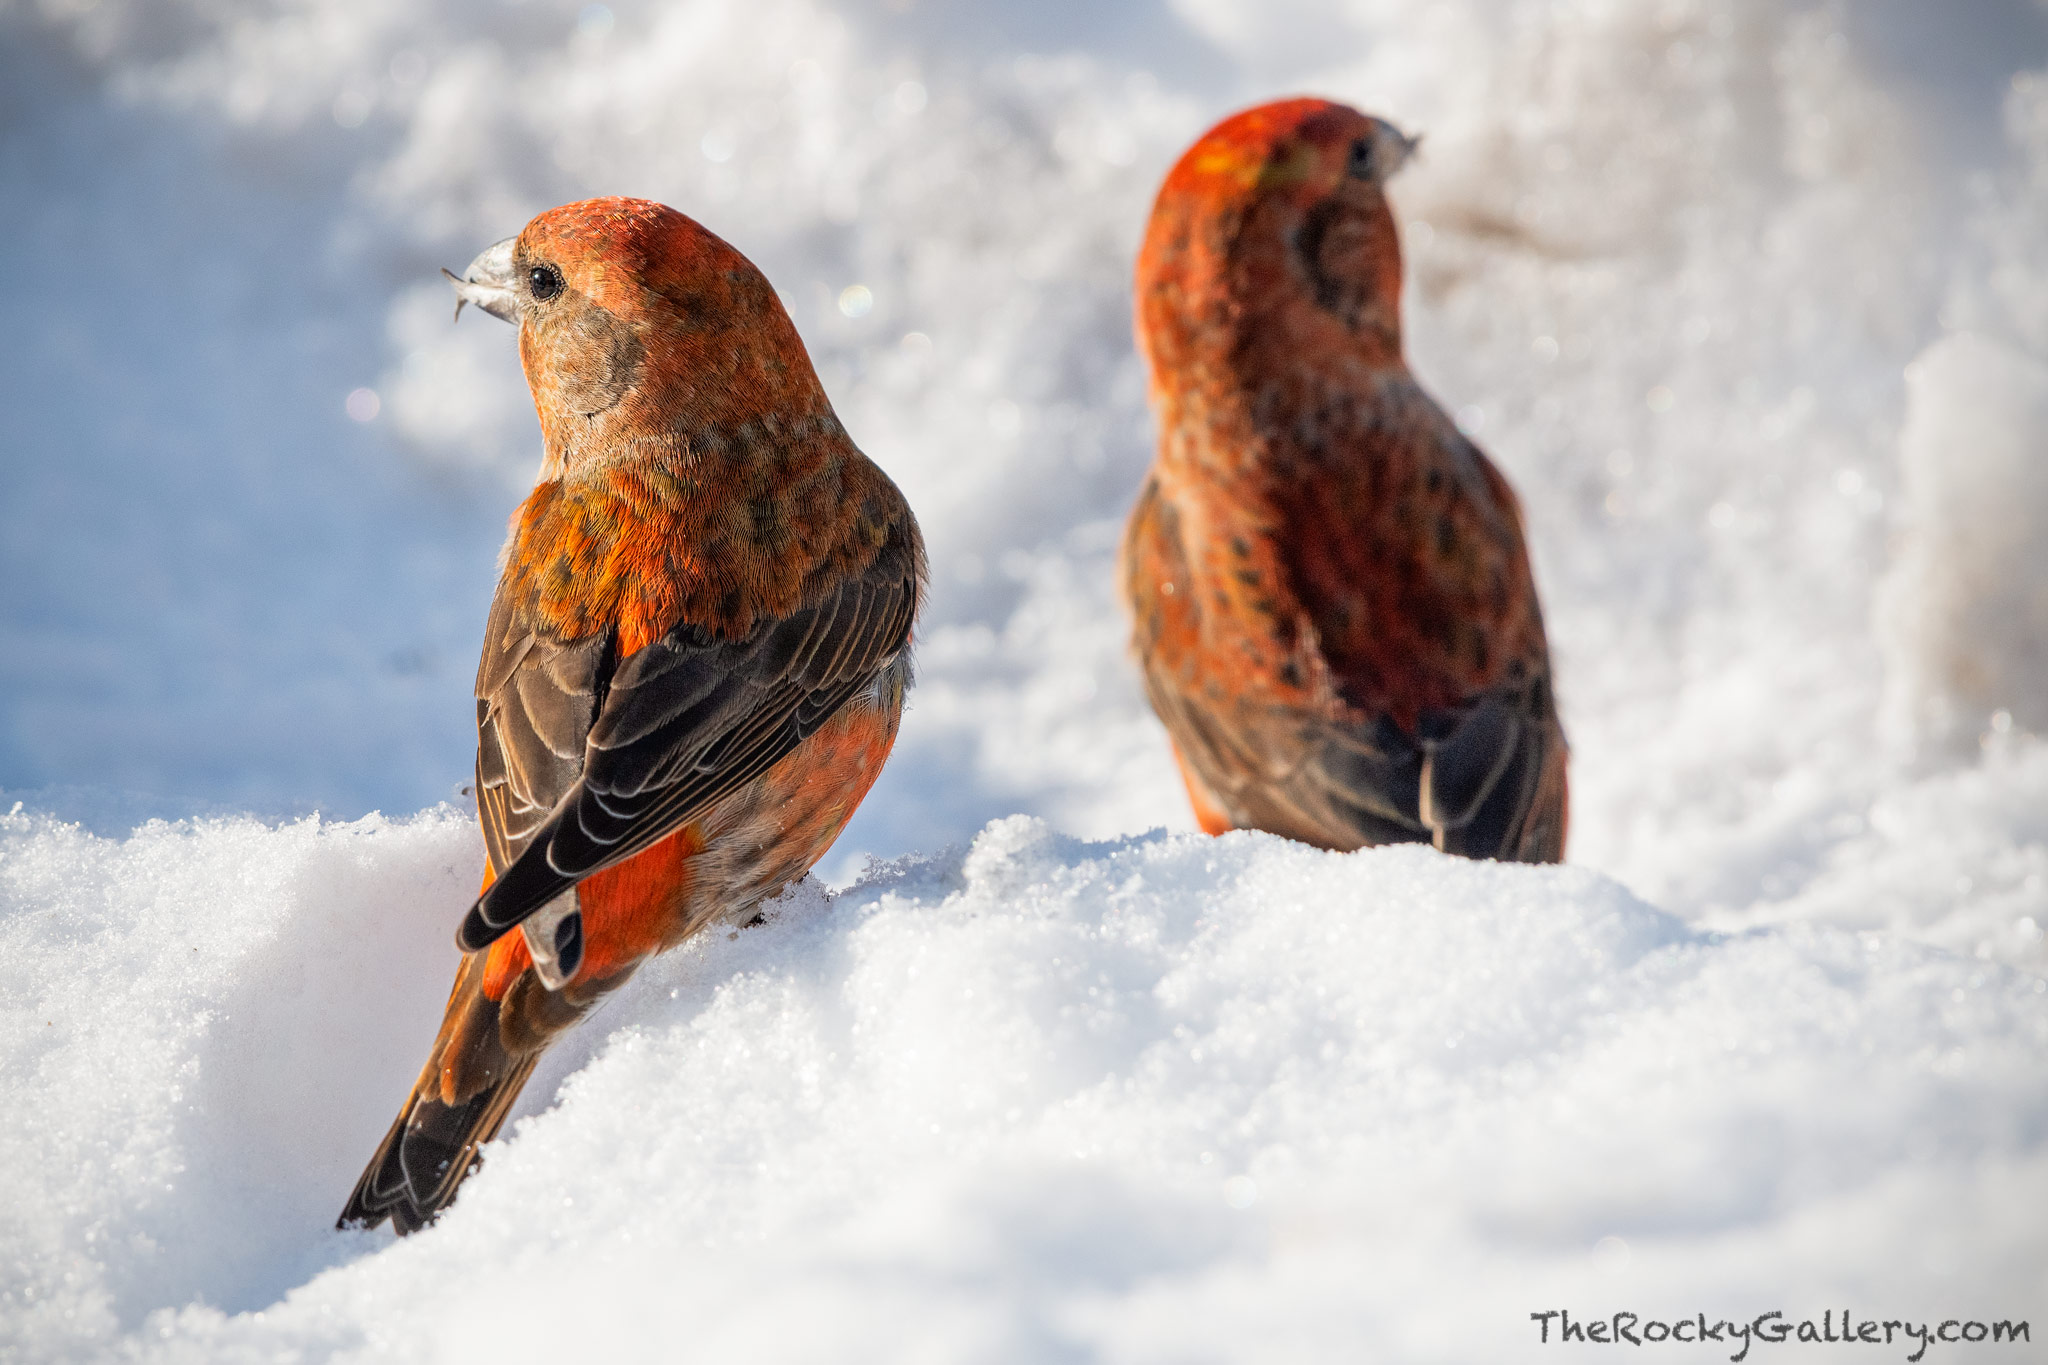 Red Crossbills have an&nbsp;adapted bill that allows them to easily feed on seeds found in pinecones. While these Red Crossbills...